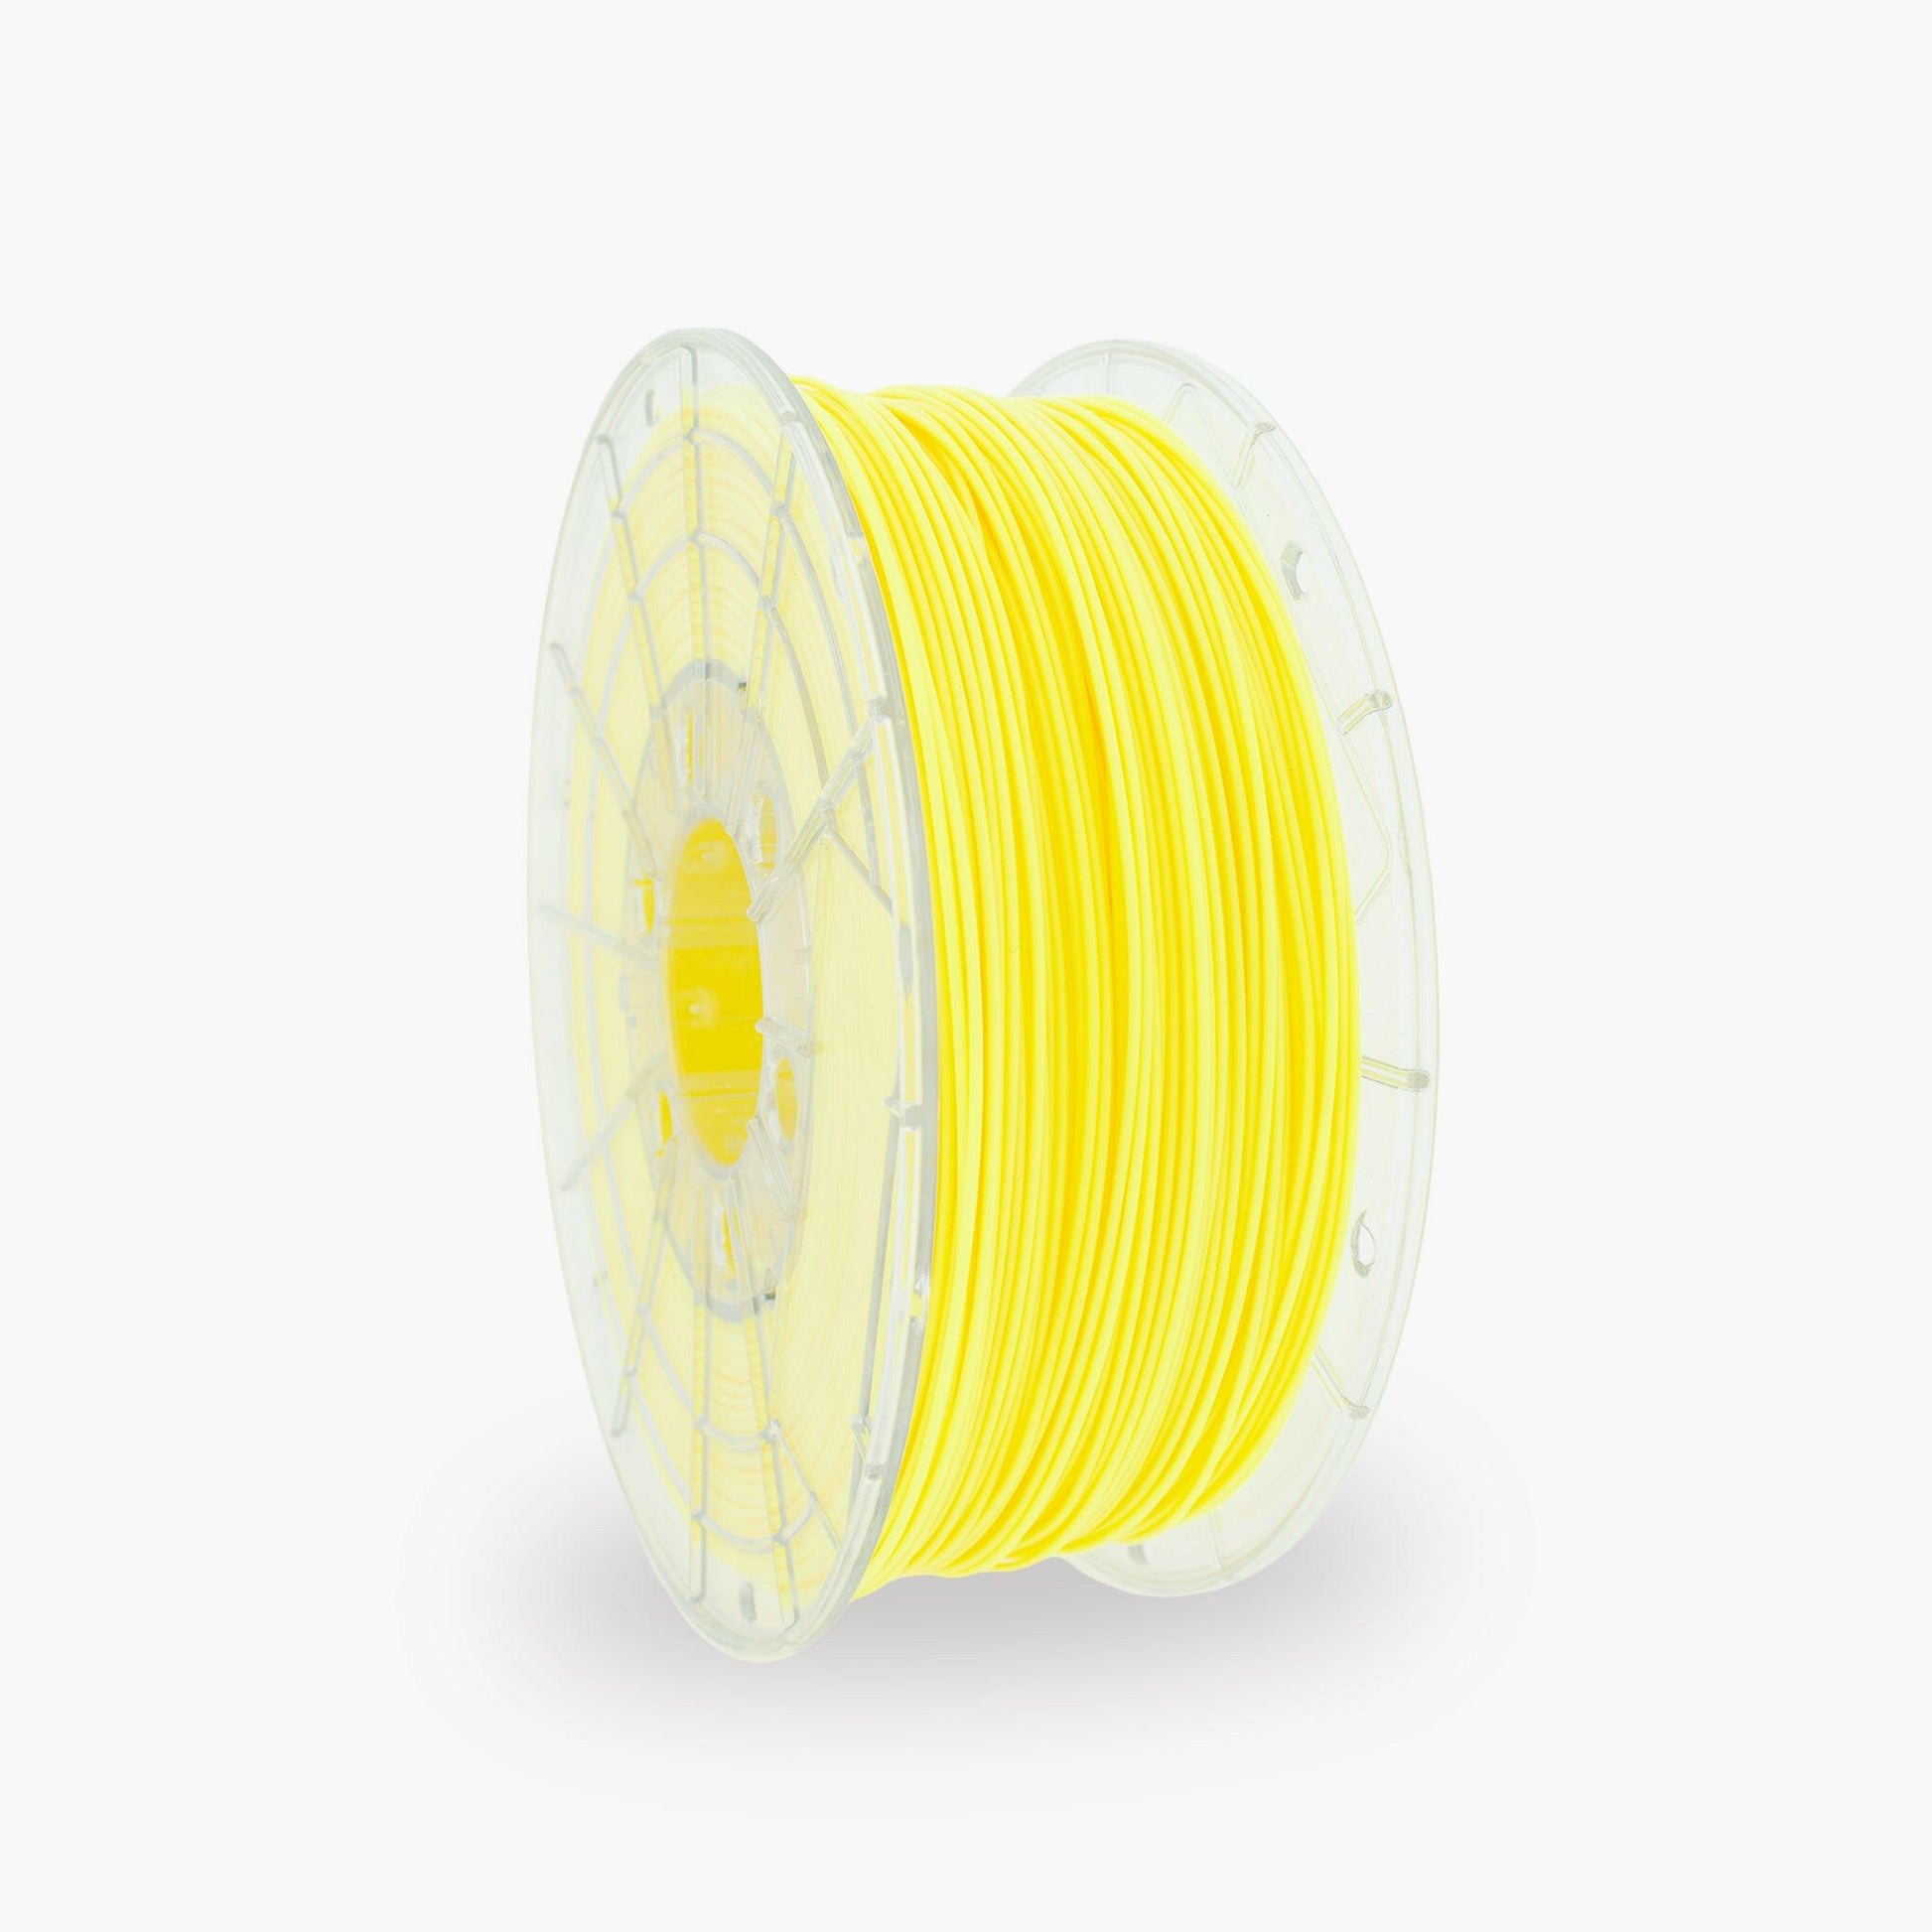 Fluor Yellow PLA 3D Printer Filament with a diameter of 1.75mm on a 1KG Spool.